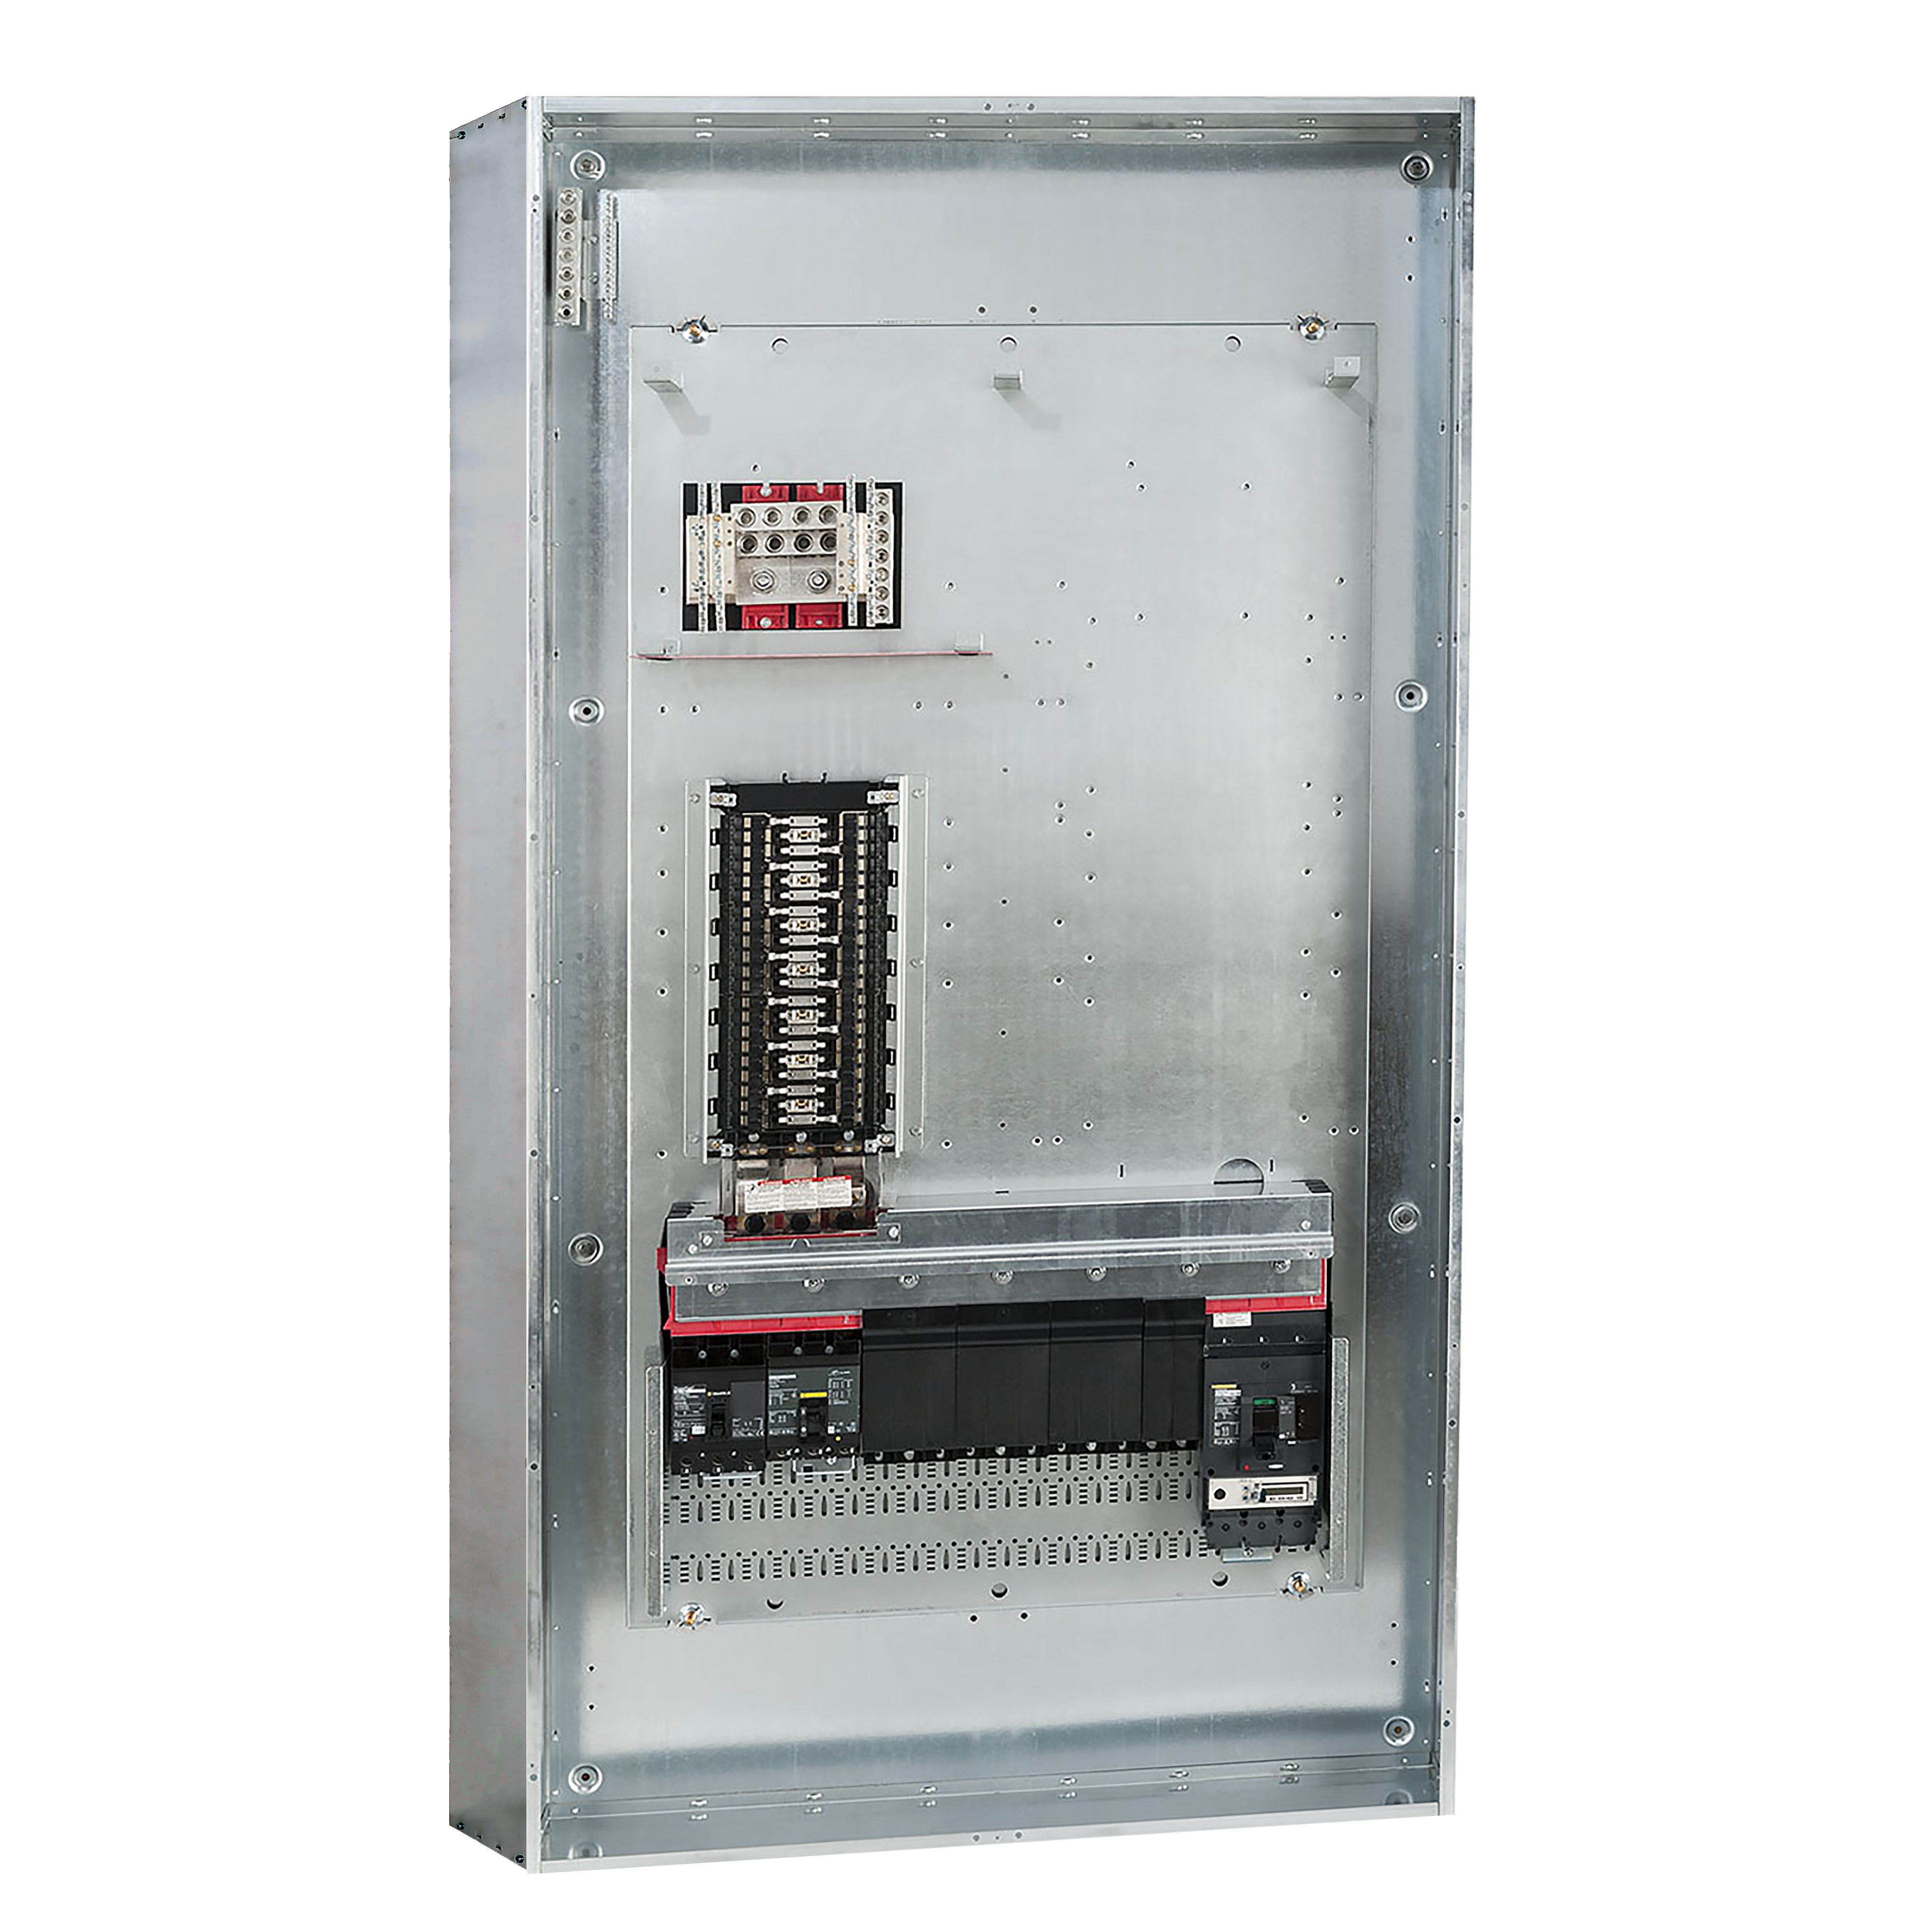 Panelboard, I-Line, 400A, 3 phase, 225A NQ lighting section with 30 circuits, Al bus